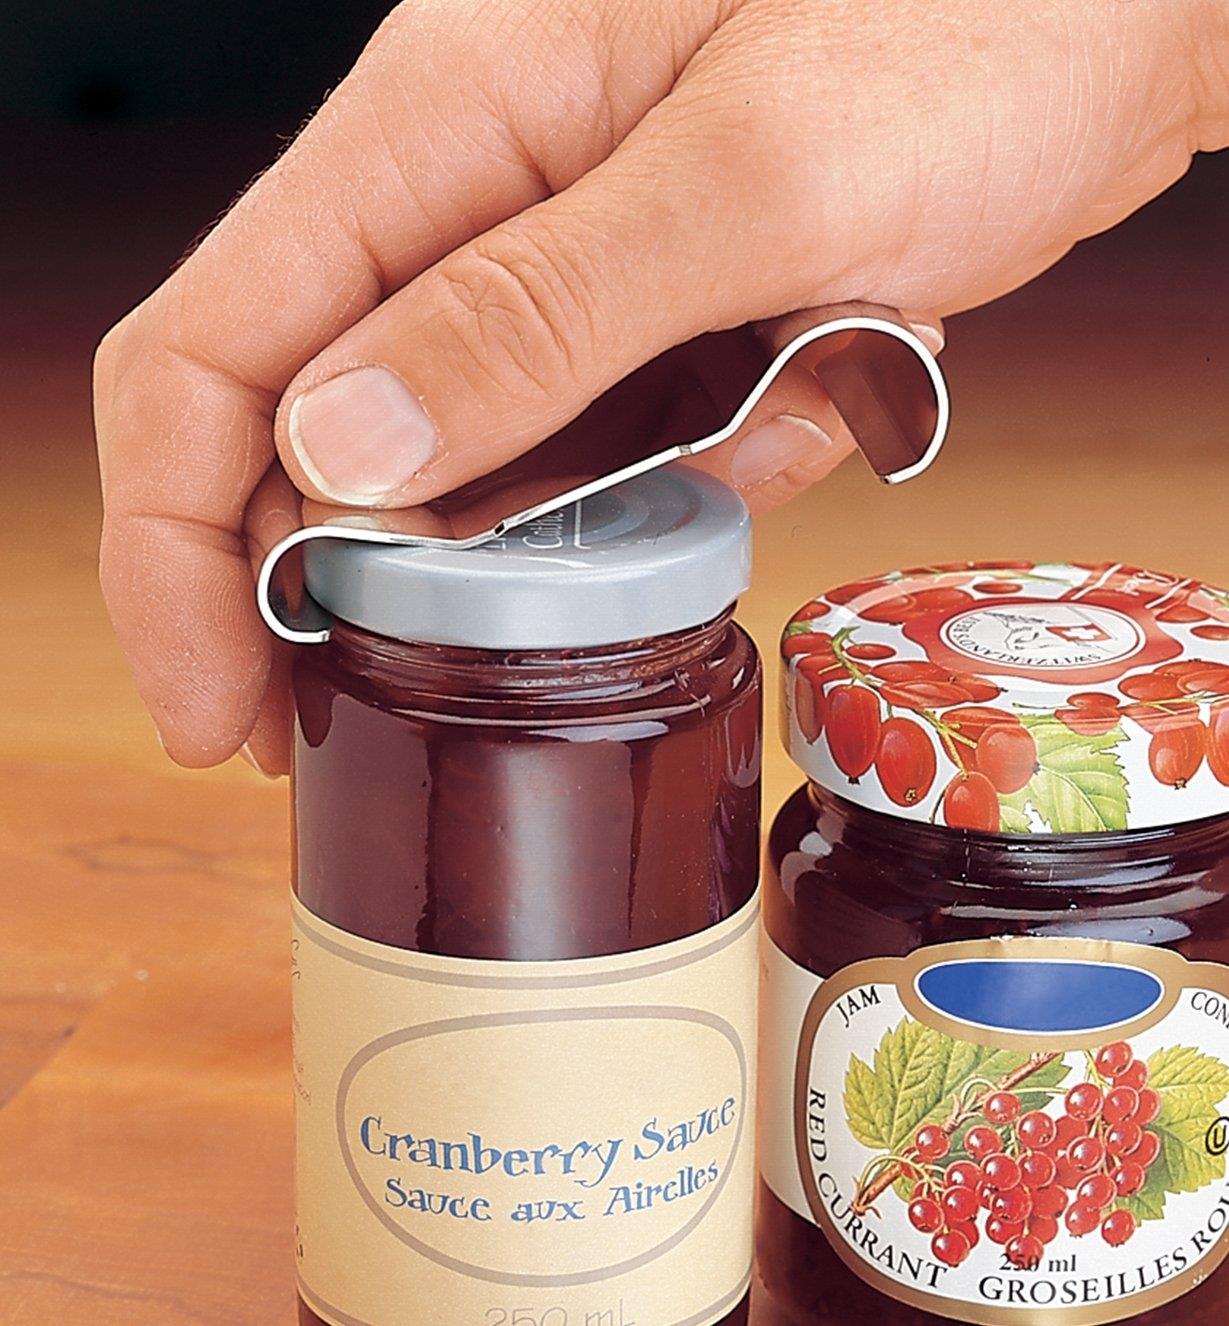 Using the Lee Valley Jar Opener to open a jar of cranberry sauce